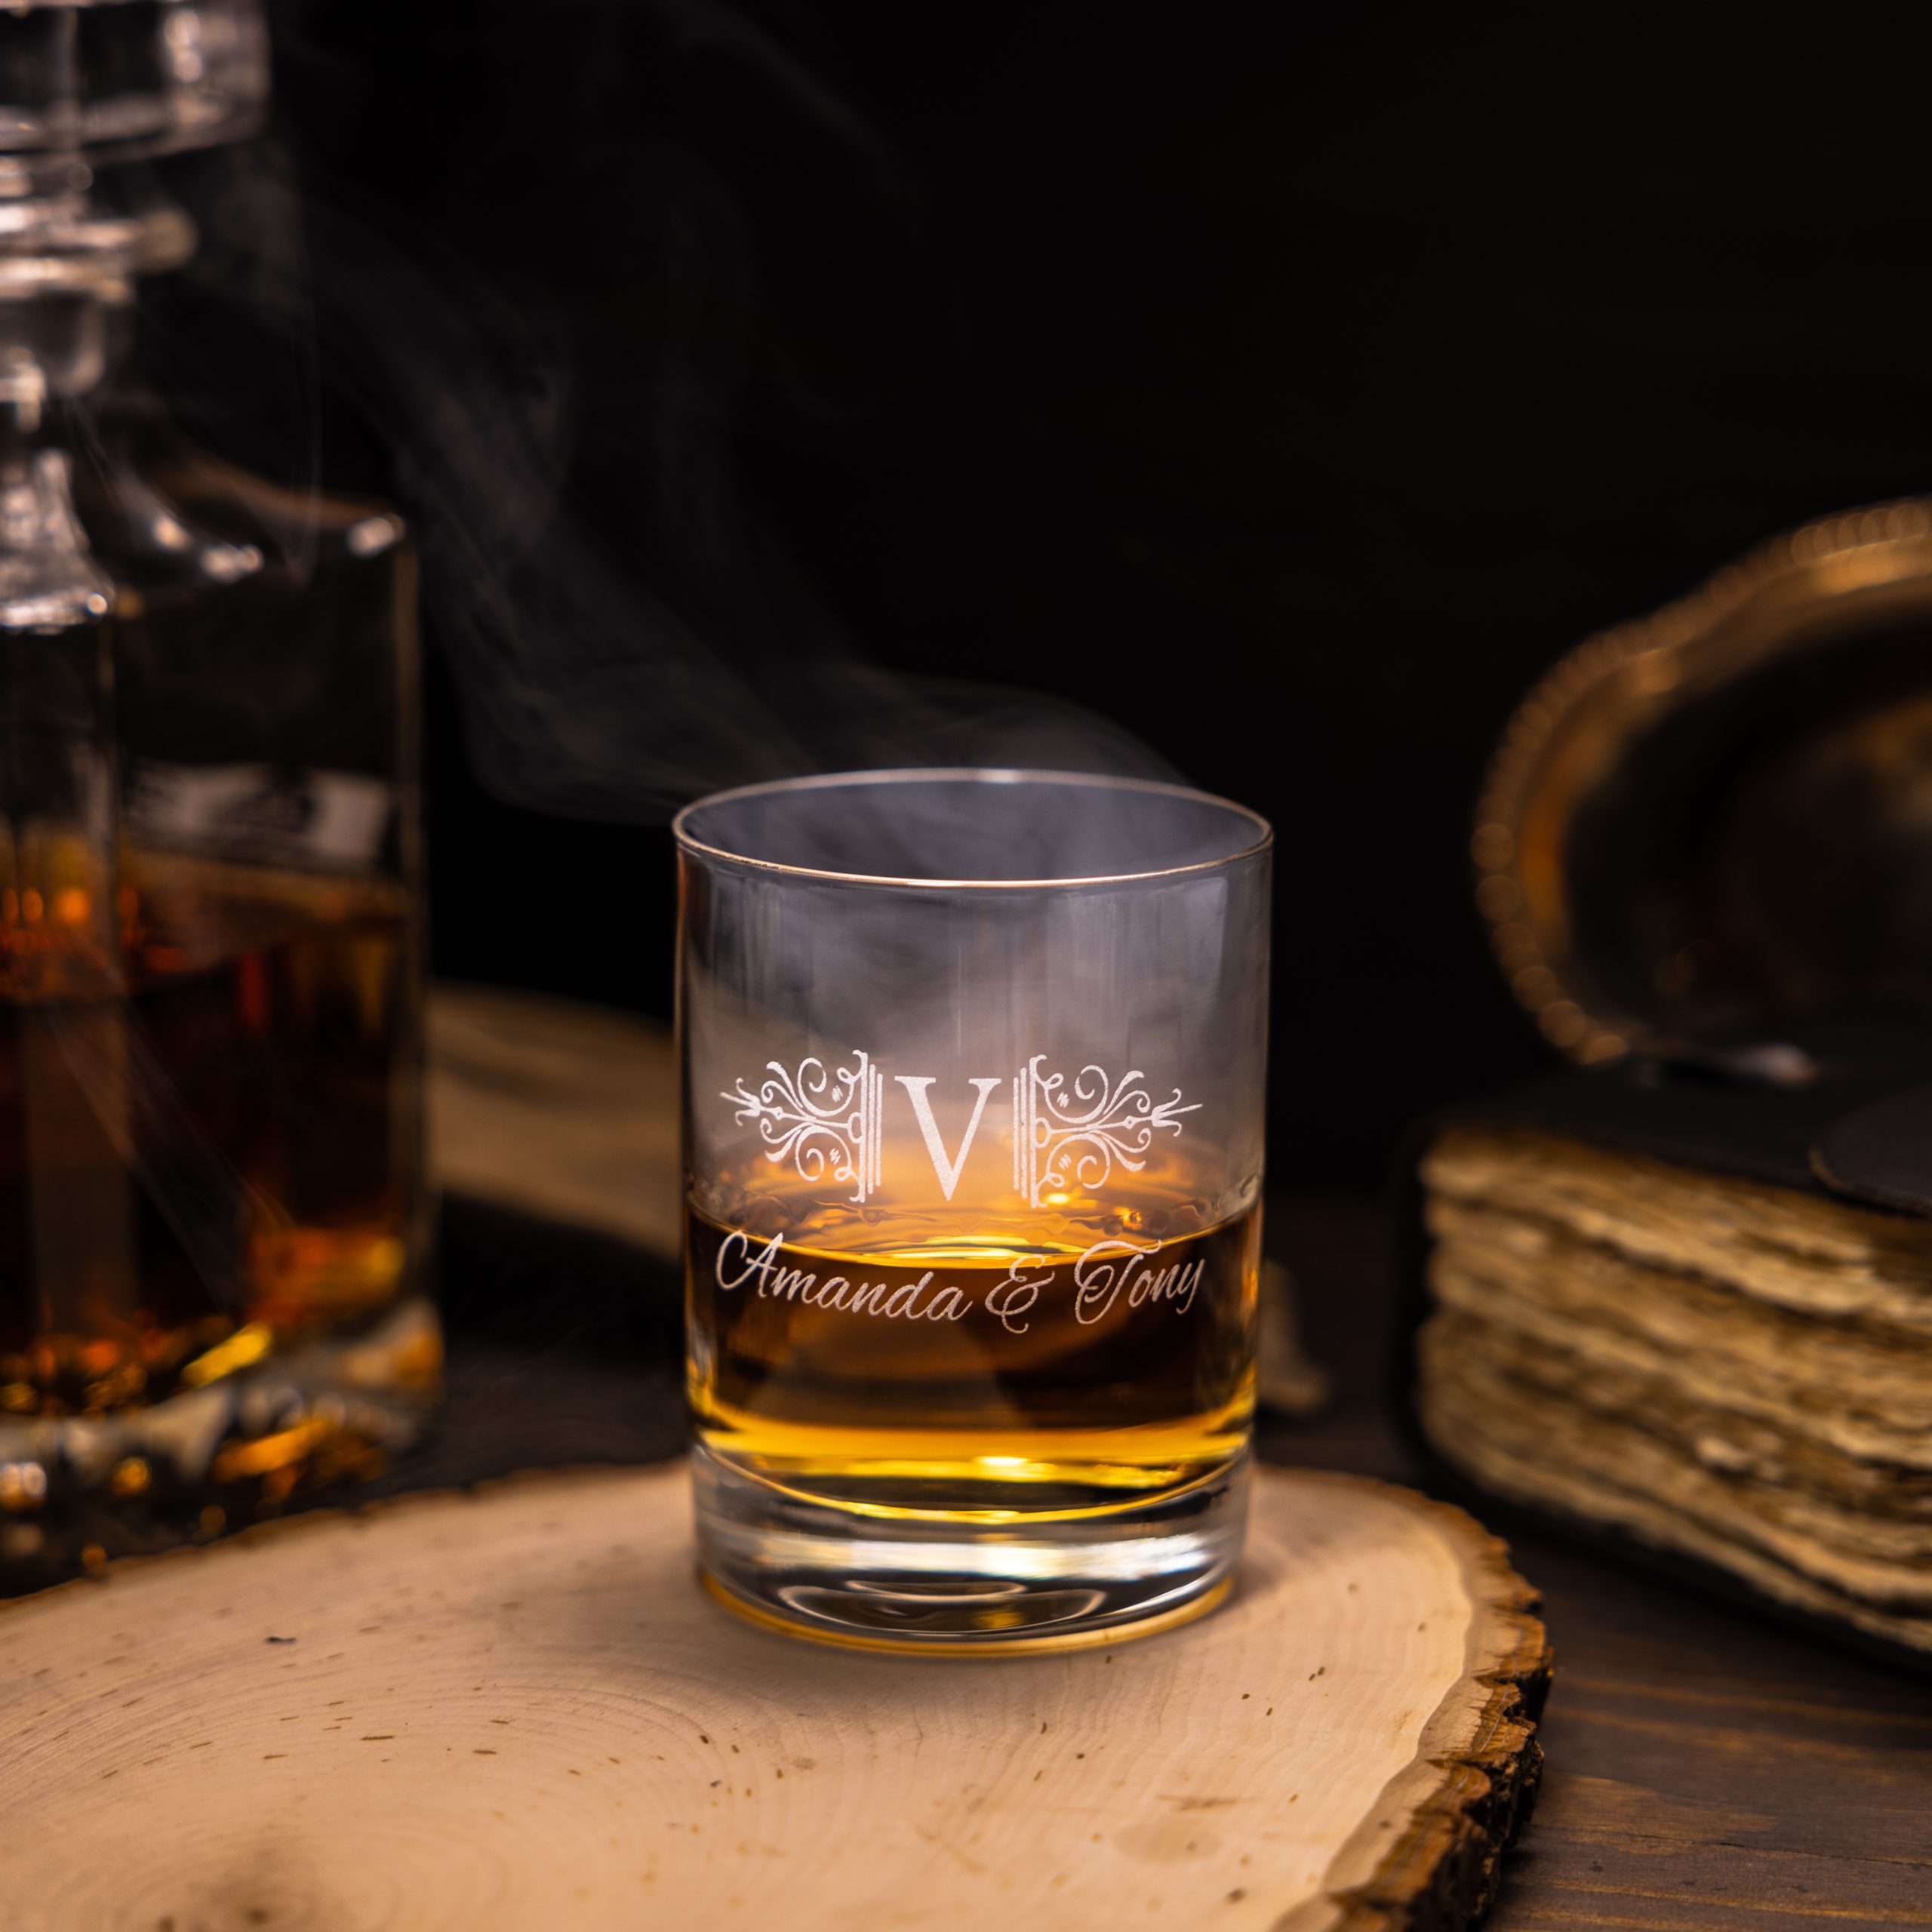 https://giftsinscribed.com/wp-content/uploads/Engraved-whiskey-glass-with-liquor-scaled.jpg